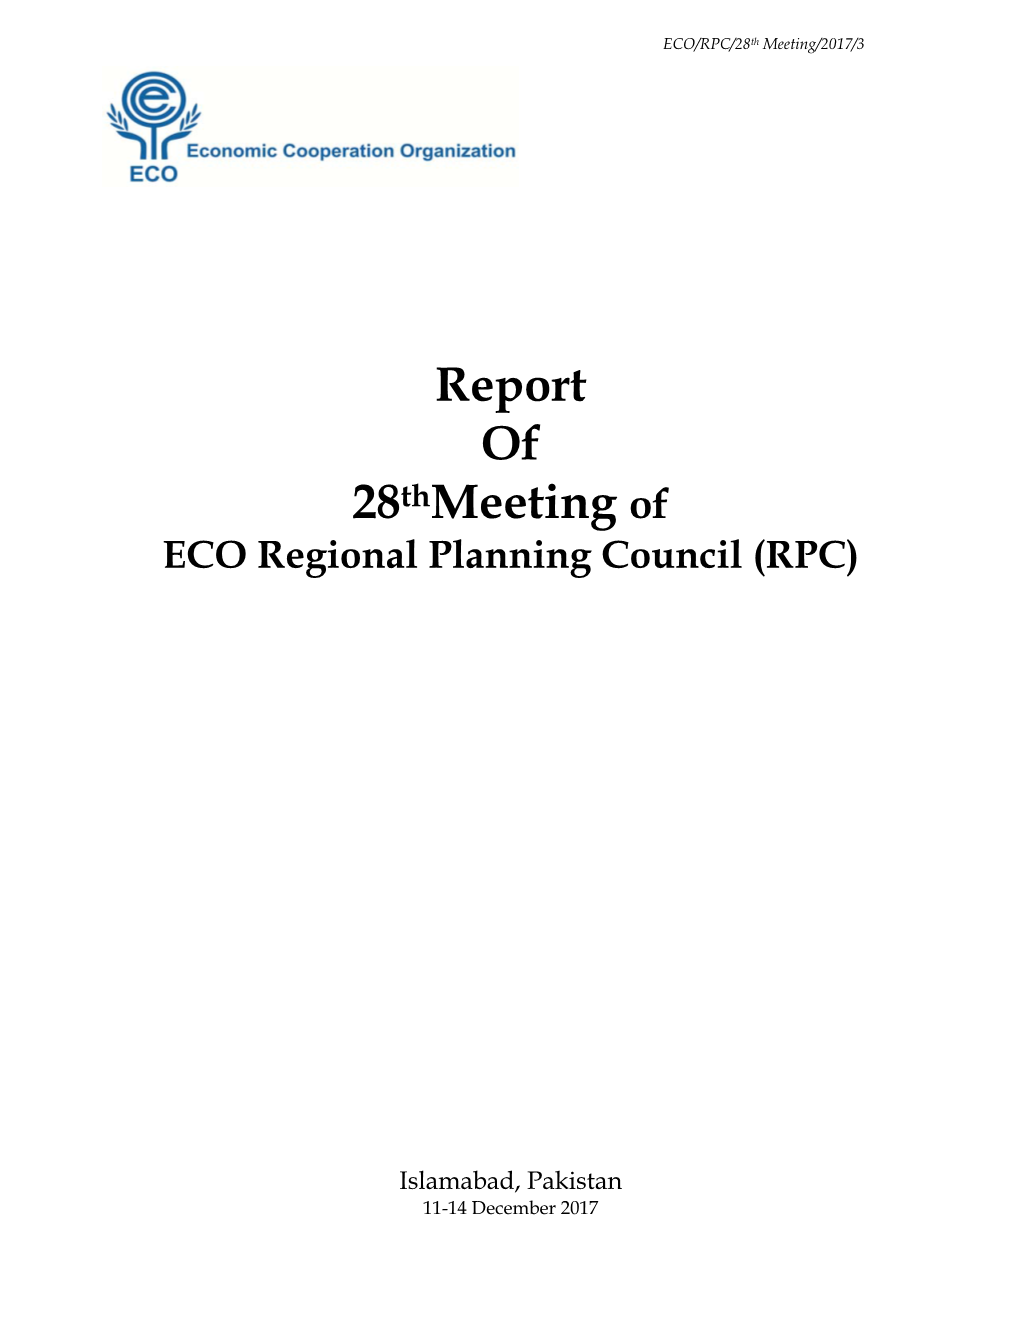 Report of 28Thmeeting of ECO Regional Planning Council (RPC)